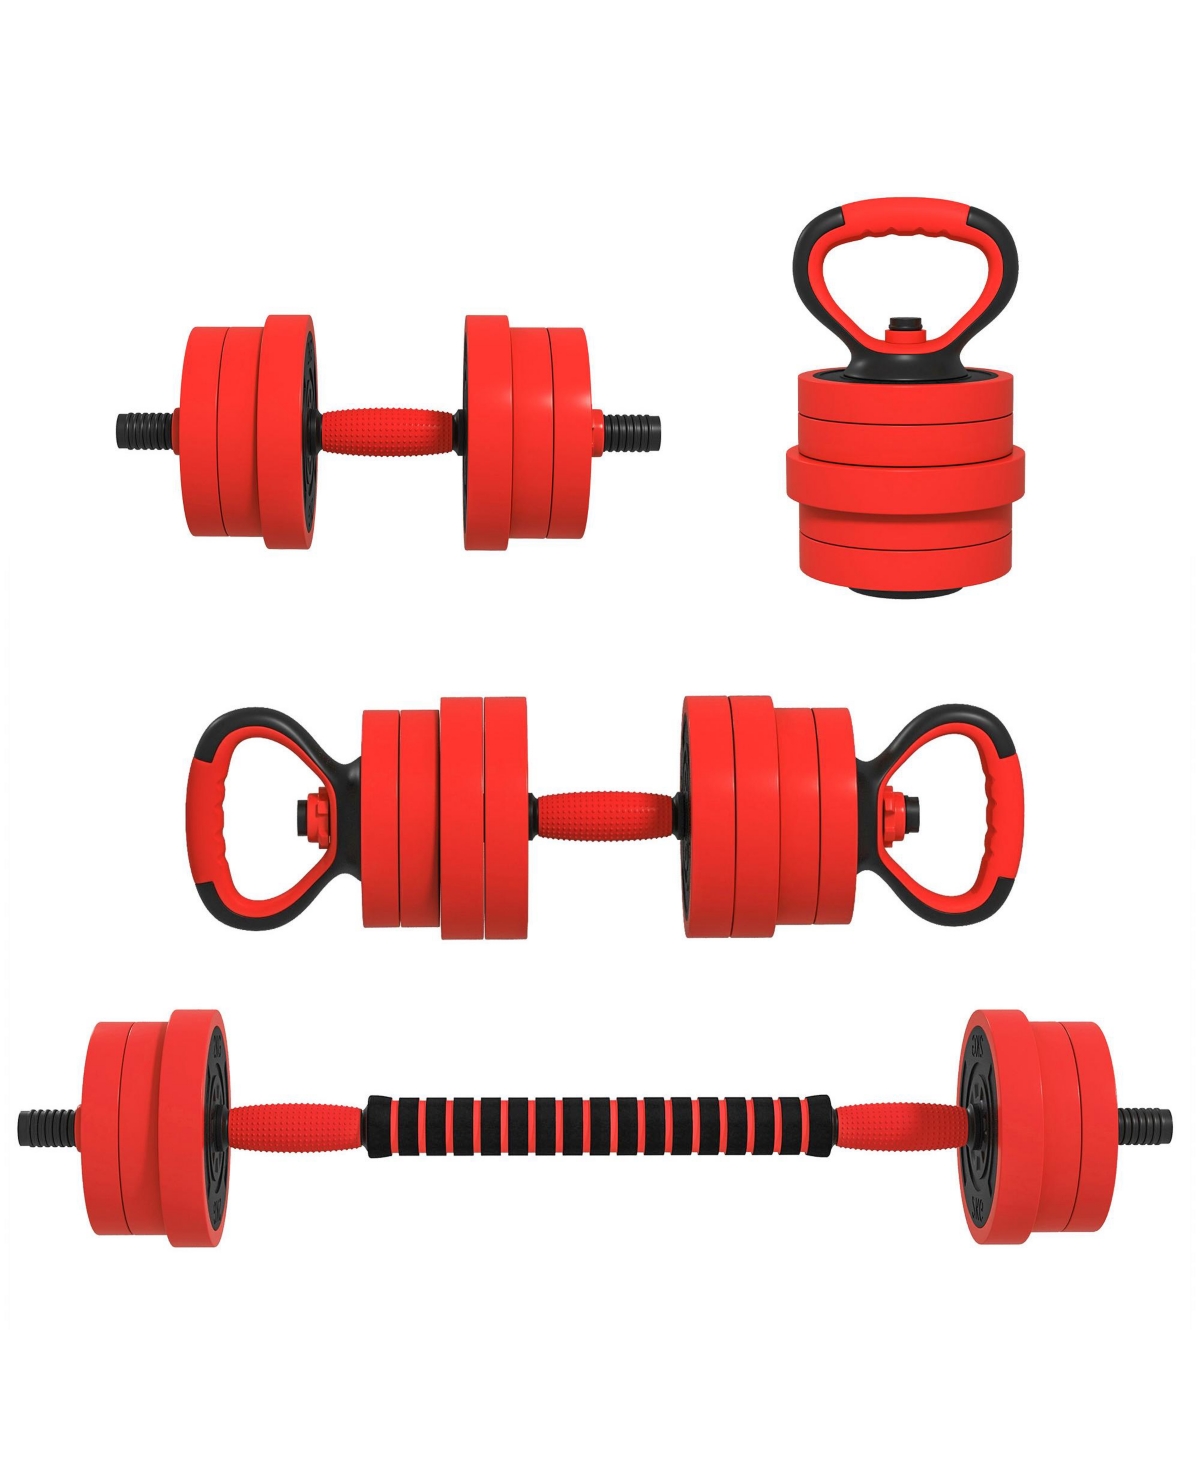 66LBS Dumbbells Set Used as Barbell, Kettle bell, Push up Stand - Red